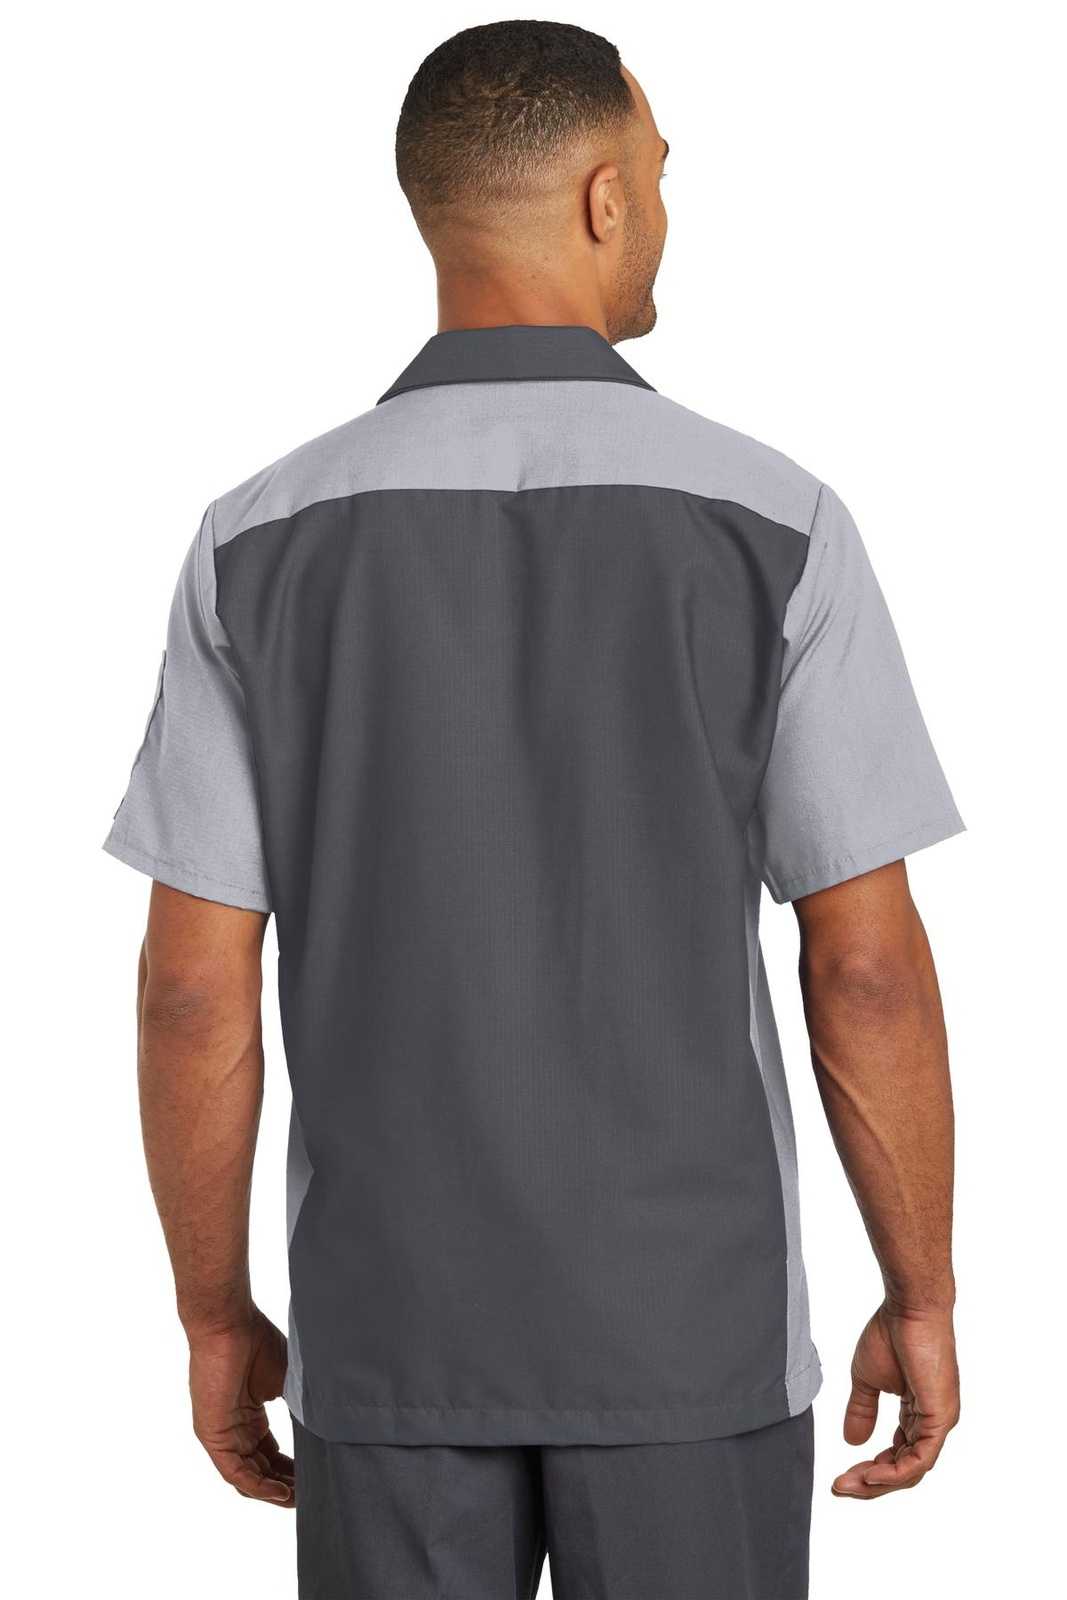 Red Kap SY20 Short Sleeve Ripstop Crew Shirt - Charcoal/ Light Gray - HIT a Double - 1